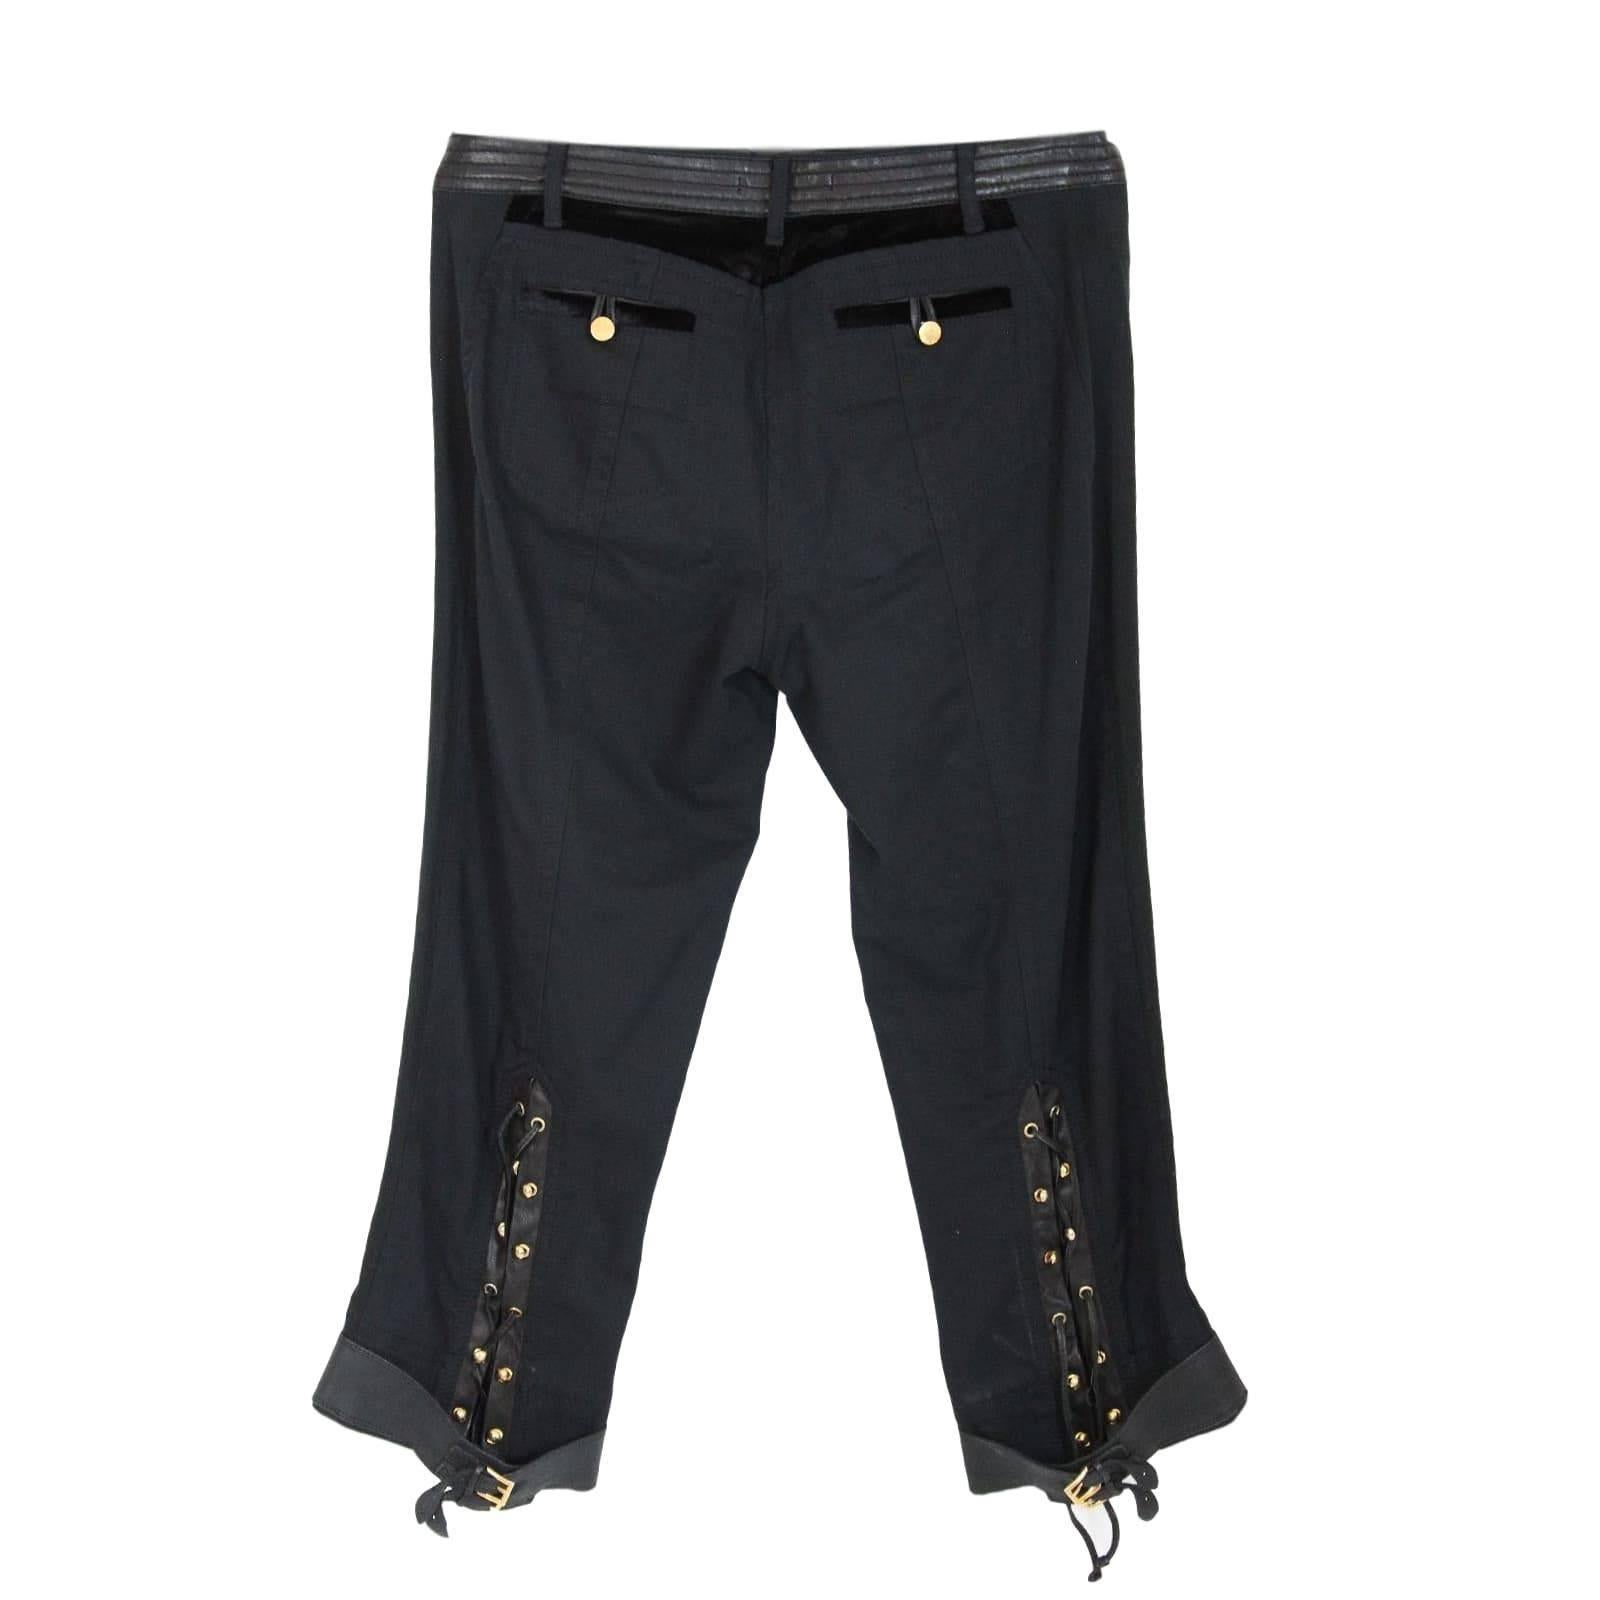 Roberto Cavalli black trousers with leather inserts and silk, Capri model with ankle laces.
Size 44 (IT)

Measures:
Waist: 40 cm
Length: 80 cm
Hem: 19 cm

Composition: 82% viscose 12% silk
Color: black
Condition: excellent vintage conditions